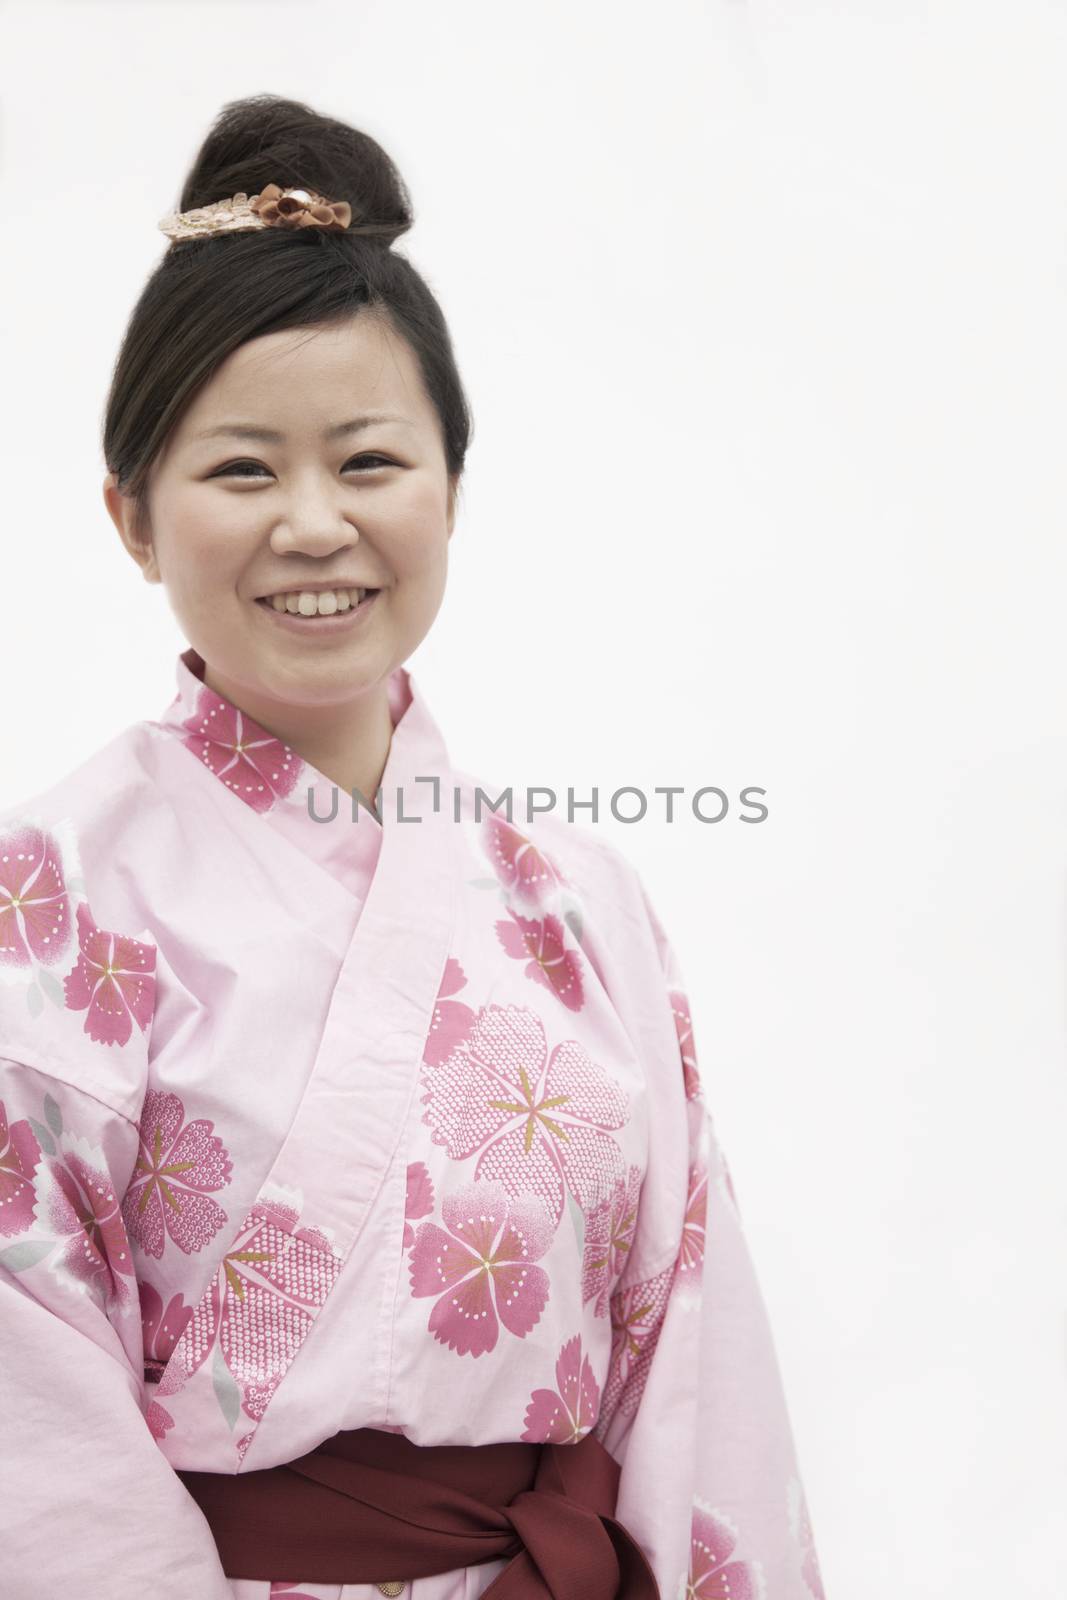 Portrait of young smiling woman in a pink Japanese kimono, studio shot